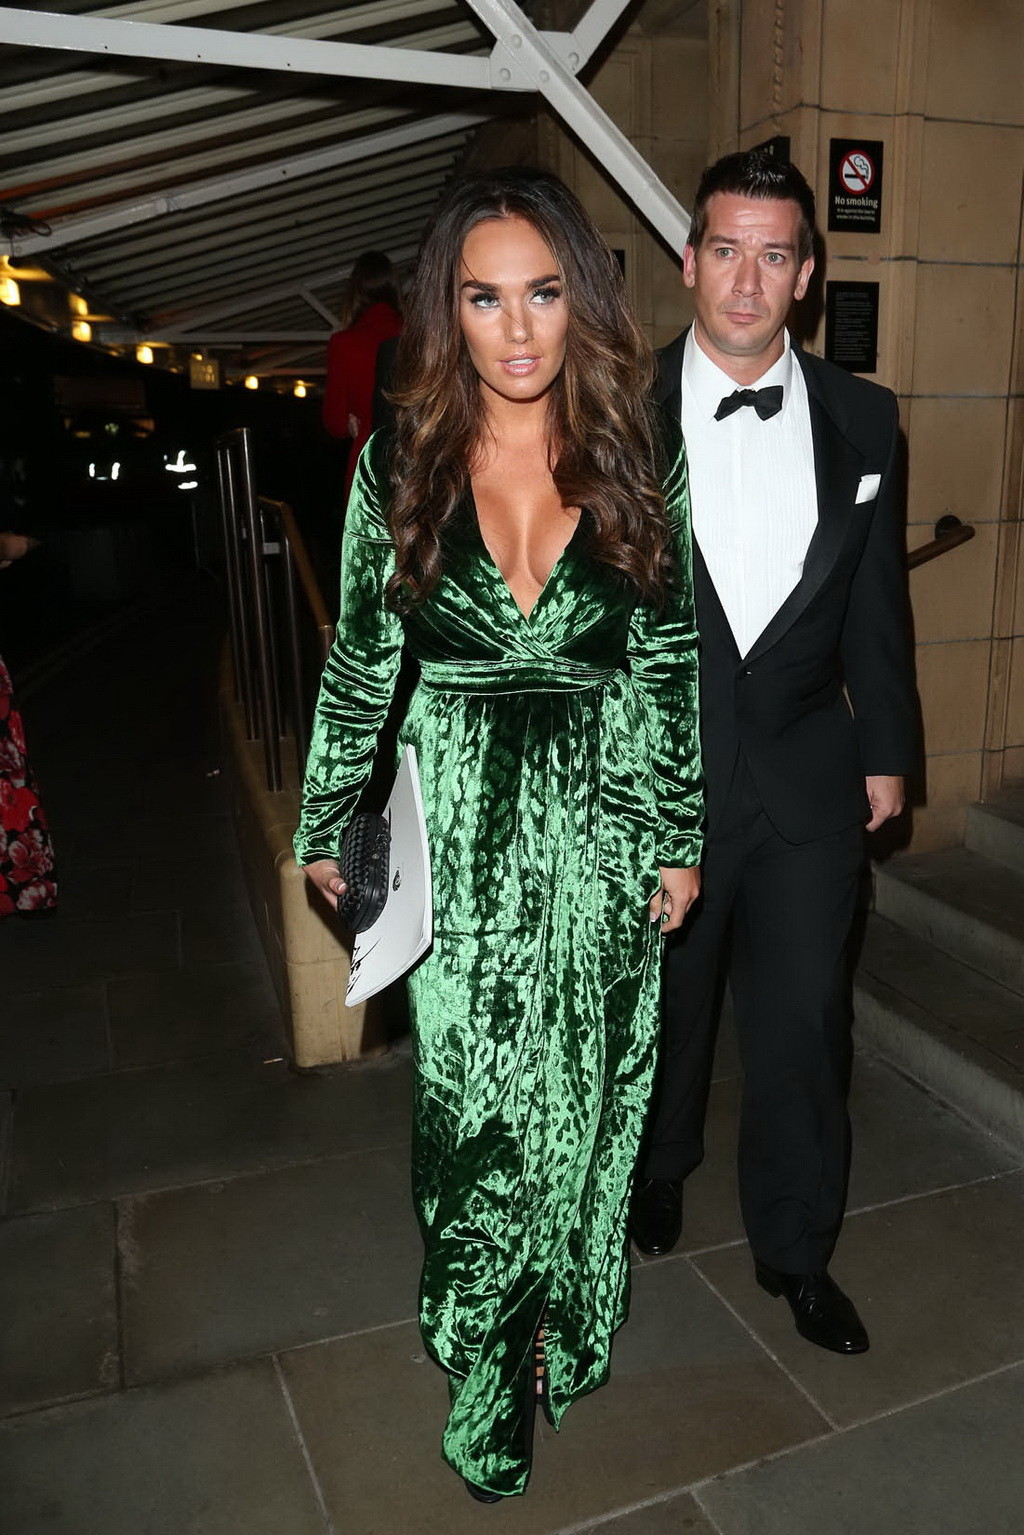 Tamara Ecclestone showing huge cleavage in a low cut green dress at the Skyfall  #75249925